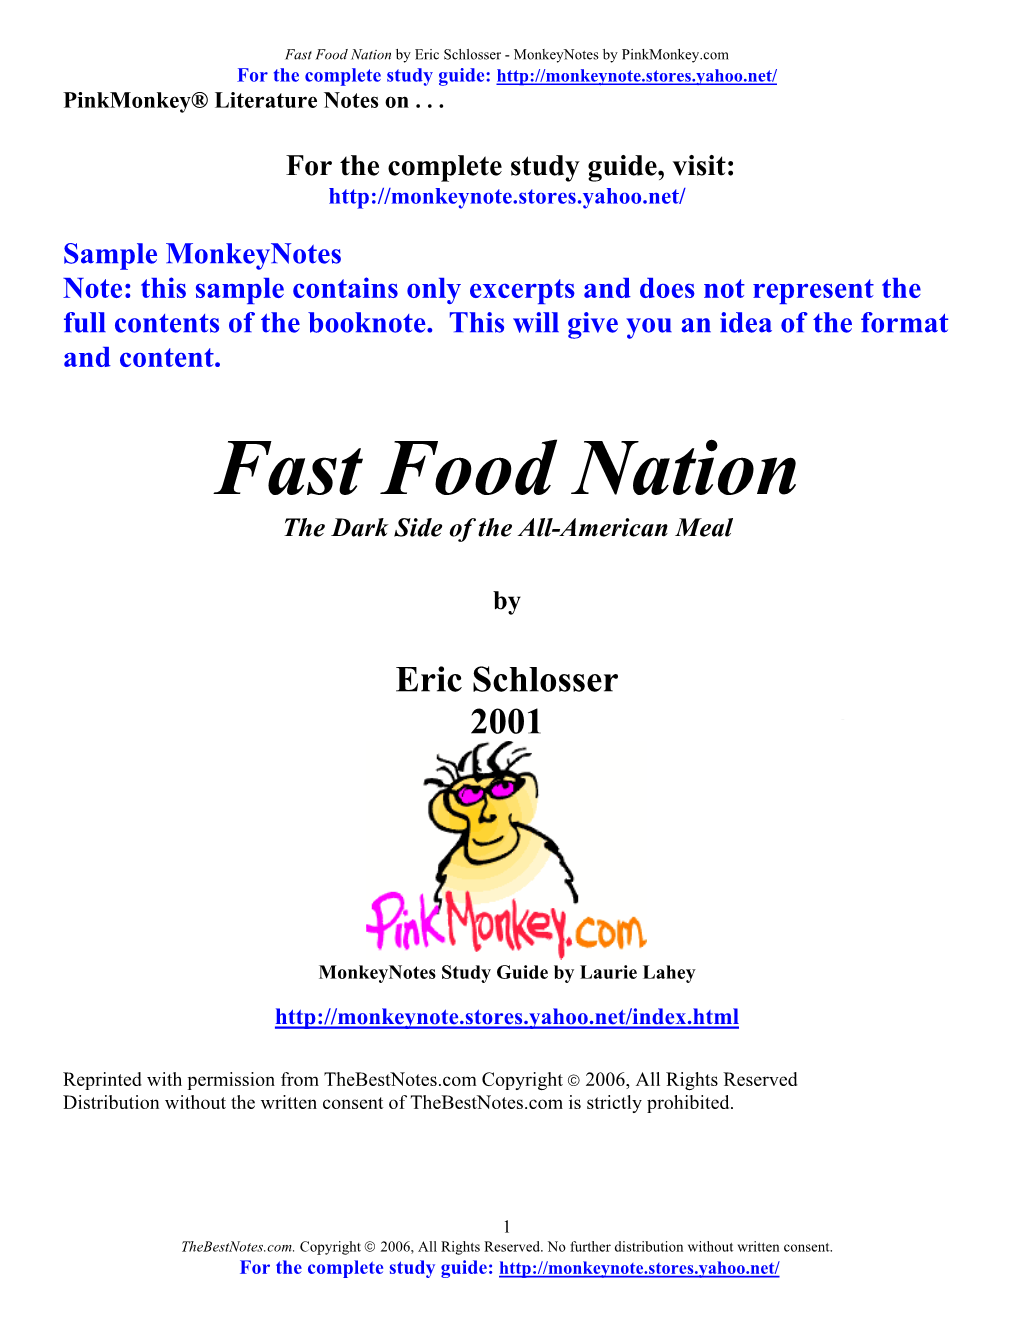 Fast Food Nation by Eric Schlosser - Monkeynotes by Pinkmonkey.Com for the Complete Study Guide: Pinkmonkey® Literature Notes On